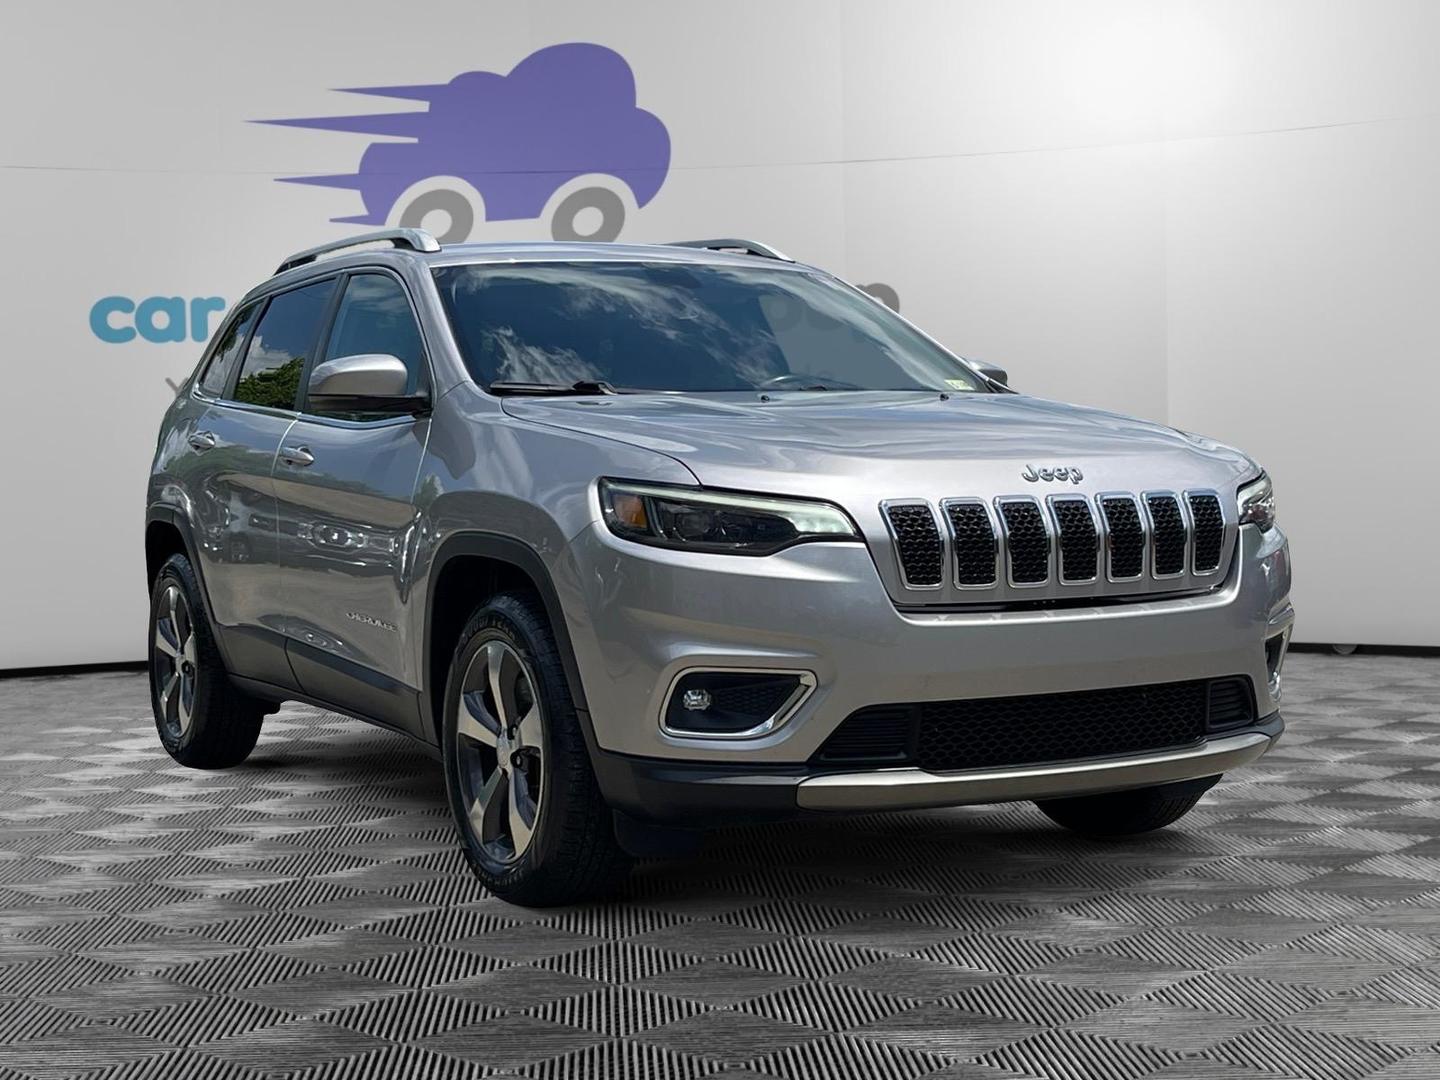 2019 Jeep Cherokee Utility 4d Limited 4wd 3.2l V6 - Image 7